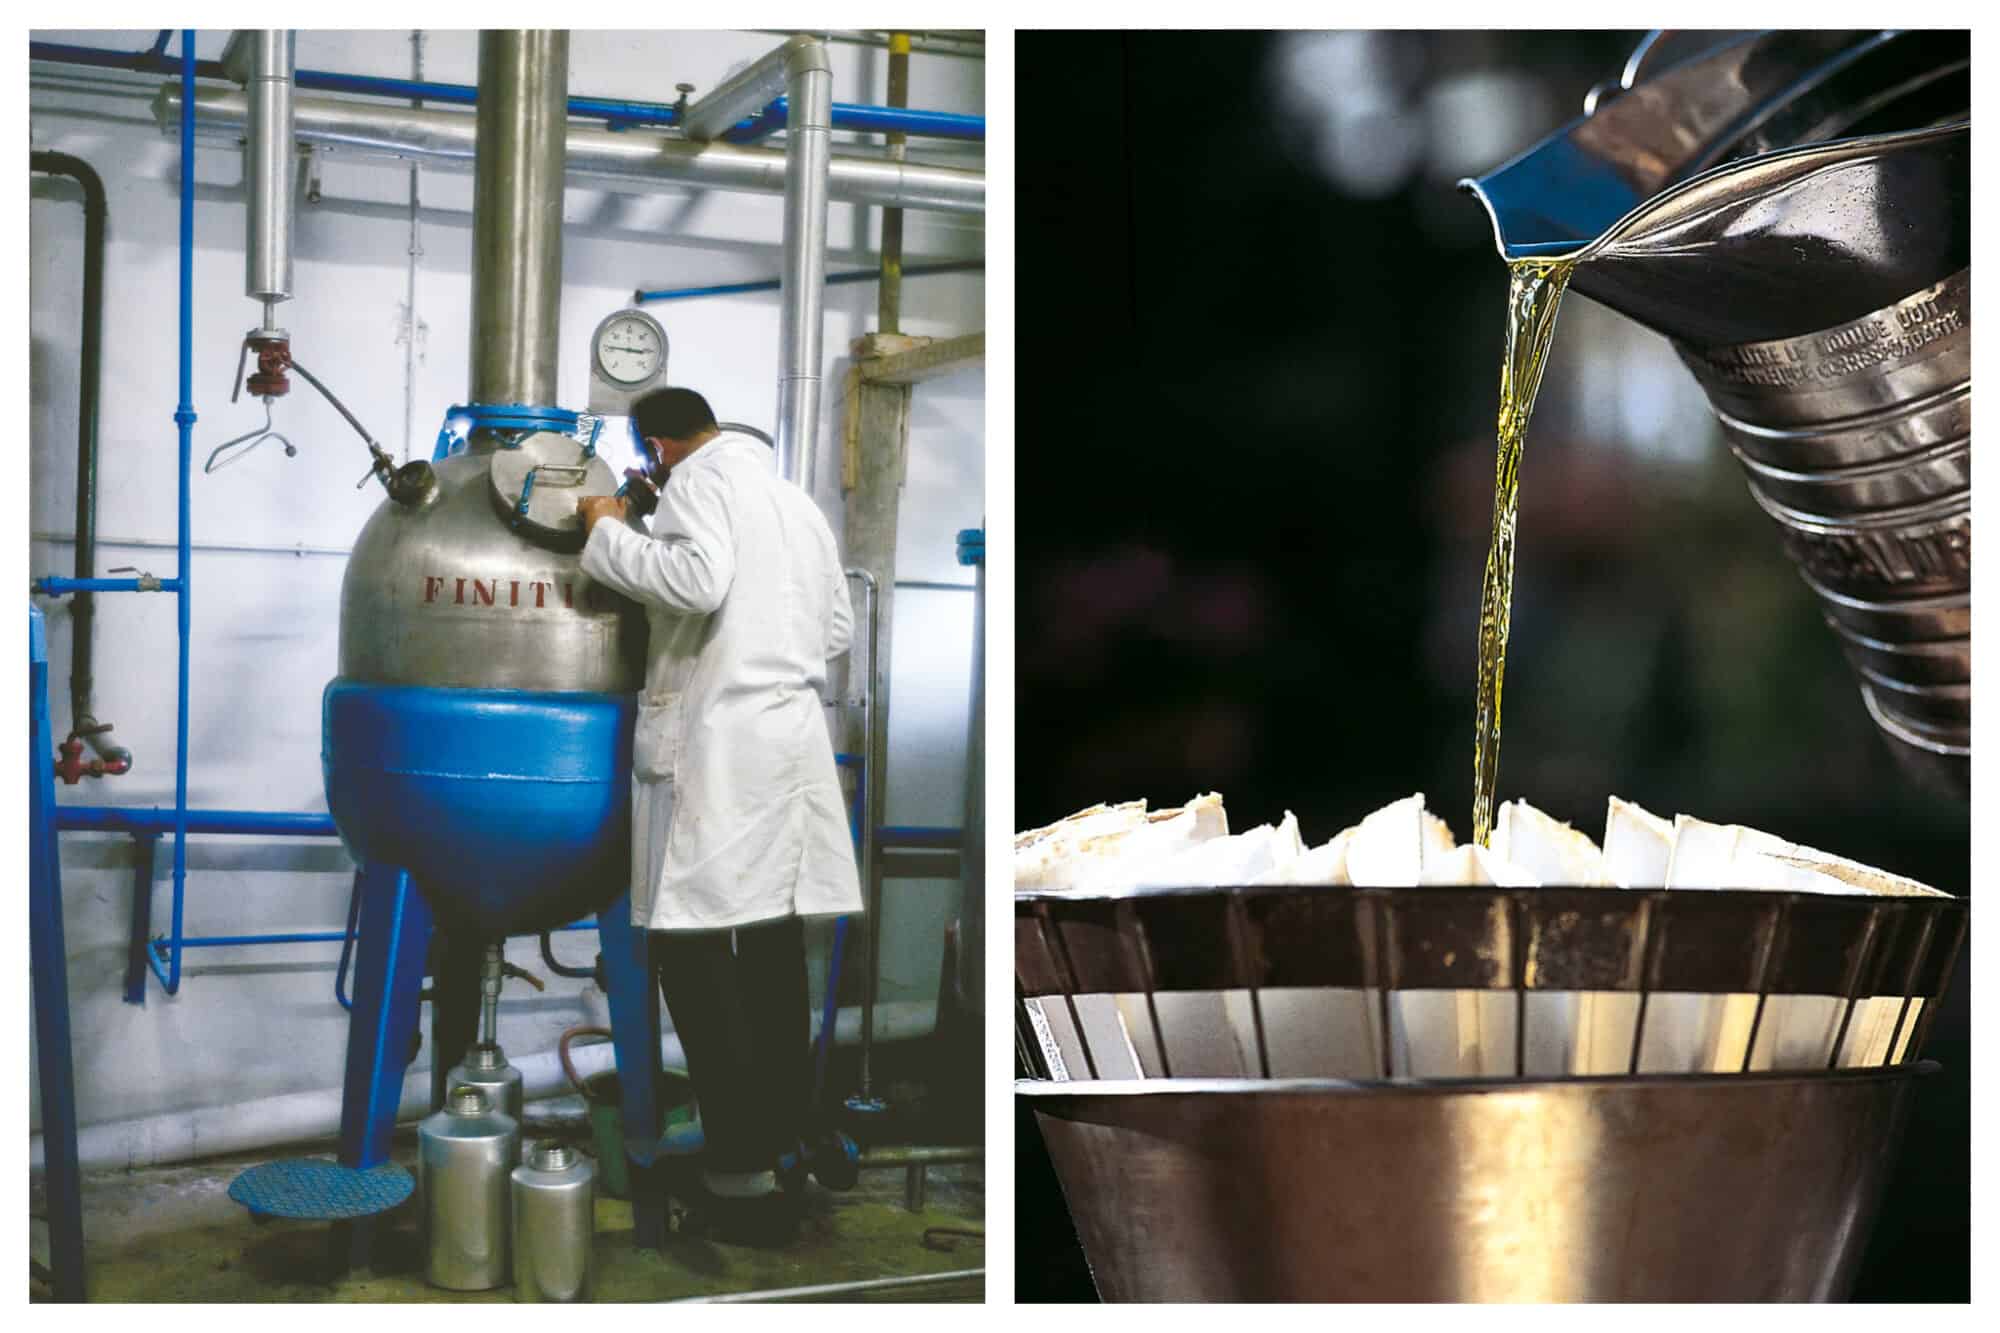 Left: A man in the Fragonard perfume factory works on a machine to extract scents from various flowers and items, Right: Perfume, Bright and golden, is poured into a strainer to be filtered